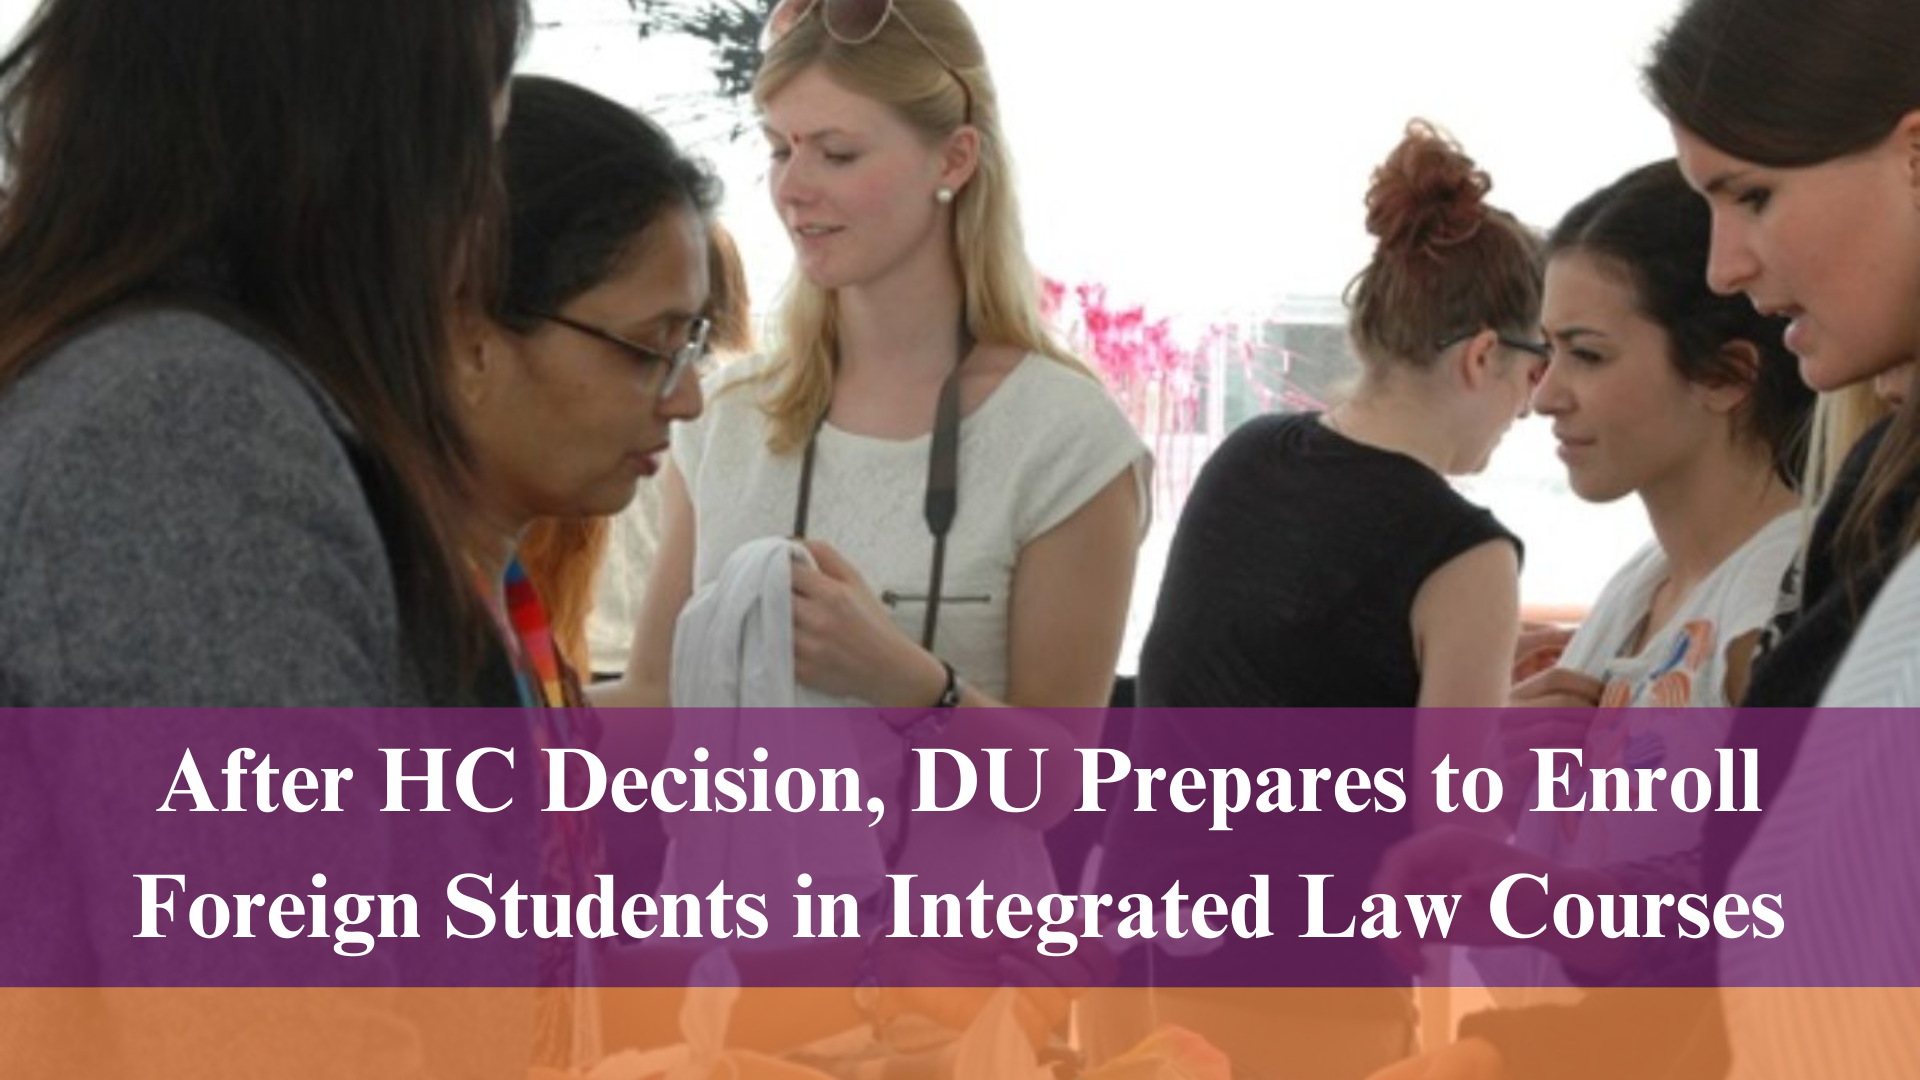 After HC Decision, DU Prepares to Enroll Foreign Students in Integrated Law Courses